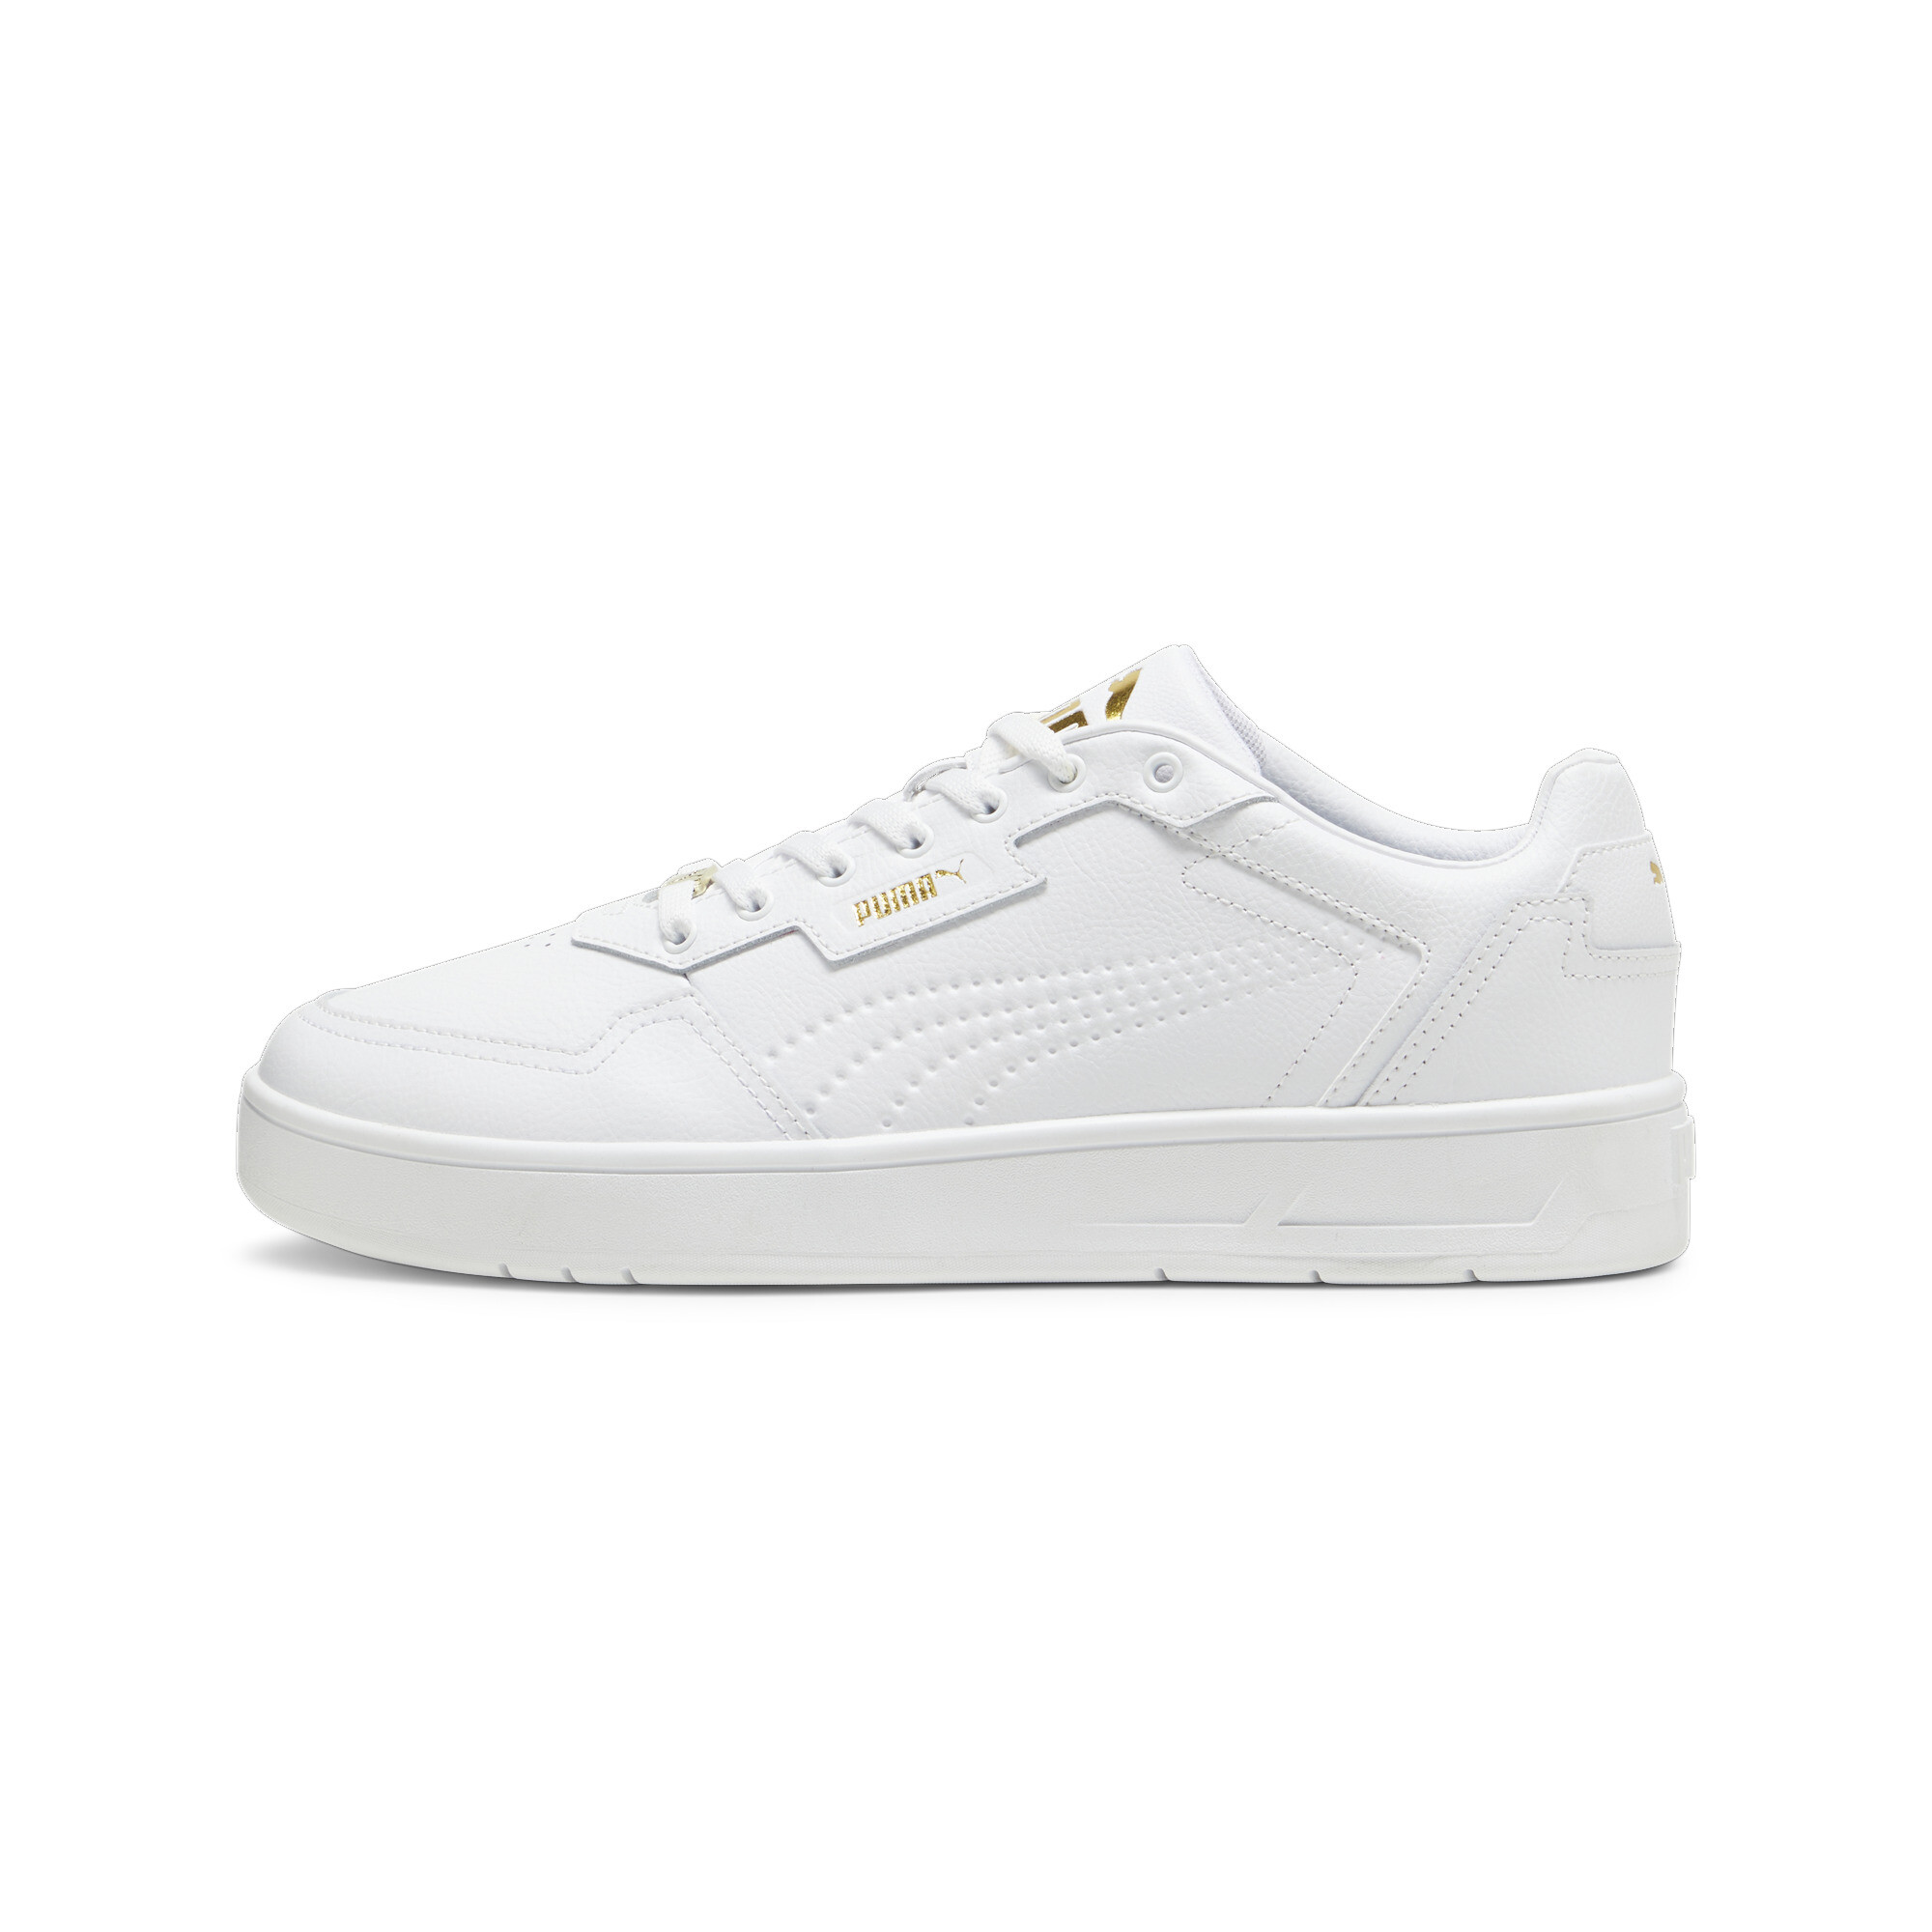 Puma Court Classic Lux Sneakers, White, Size 37, Shoes